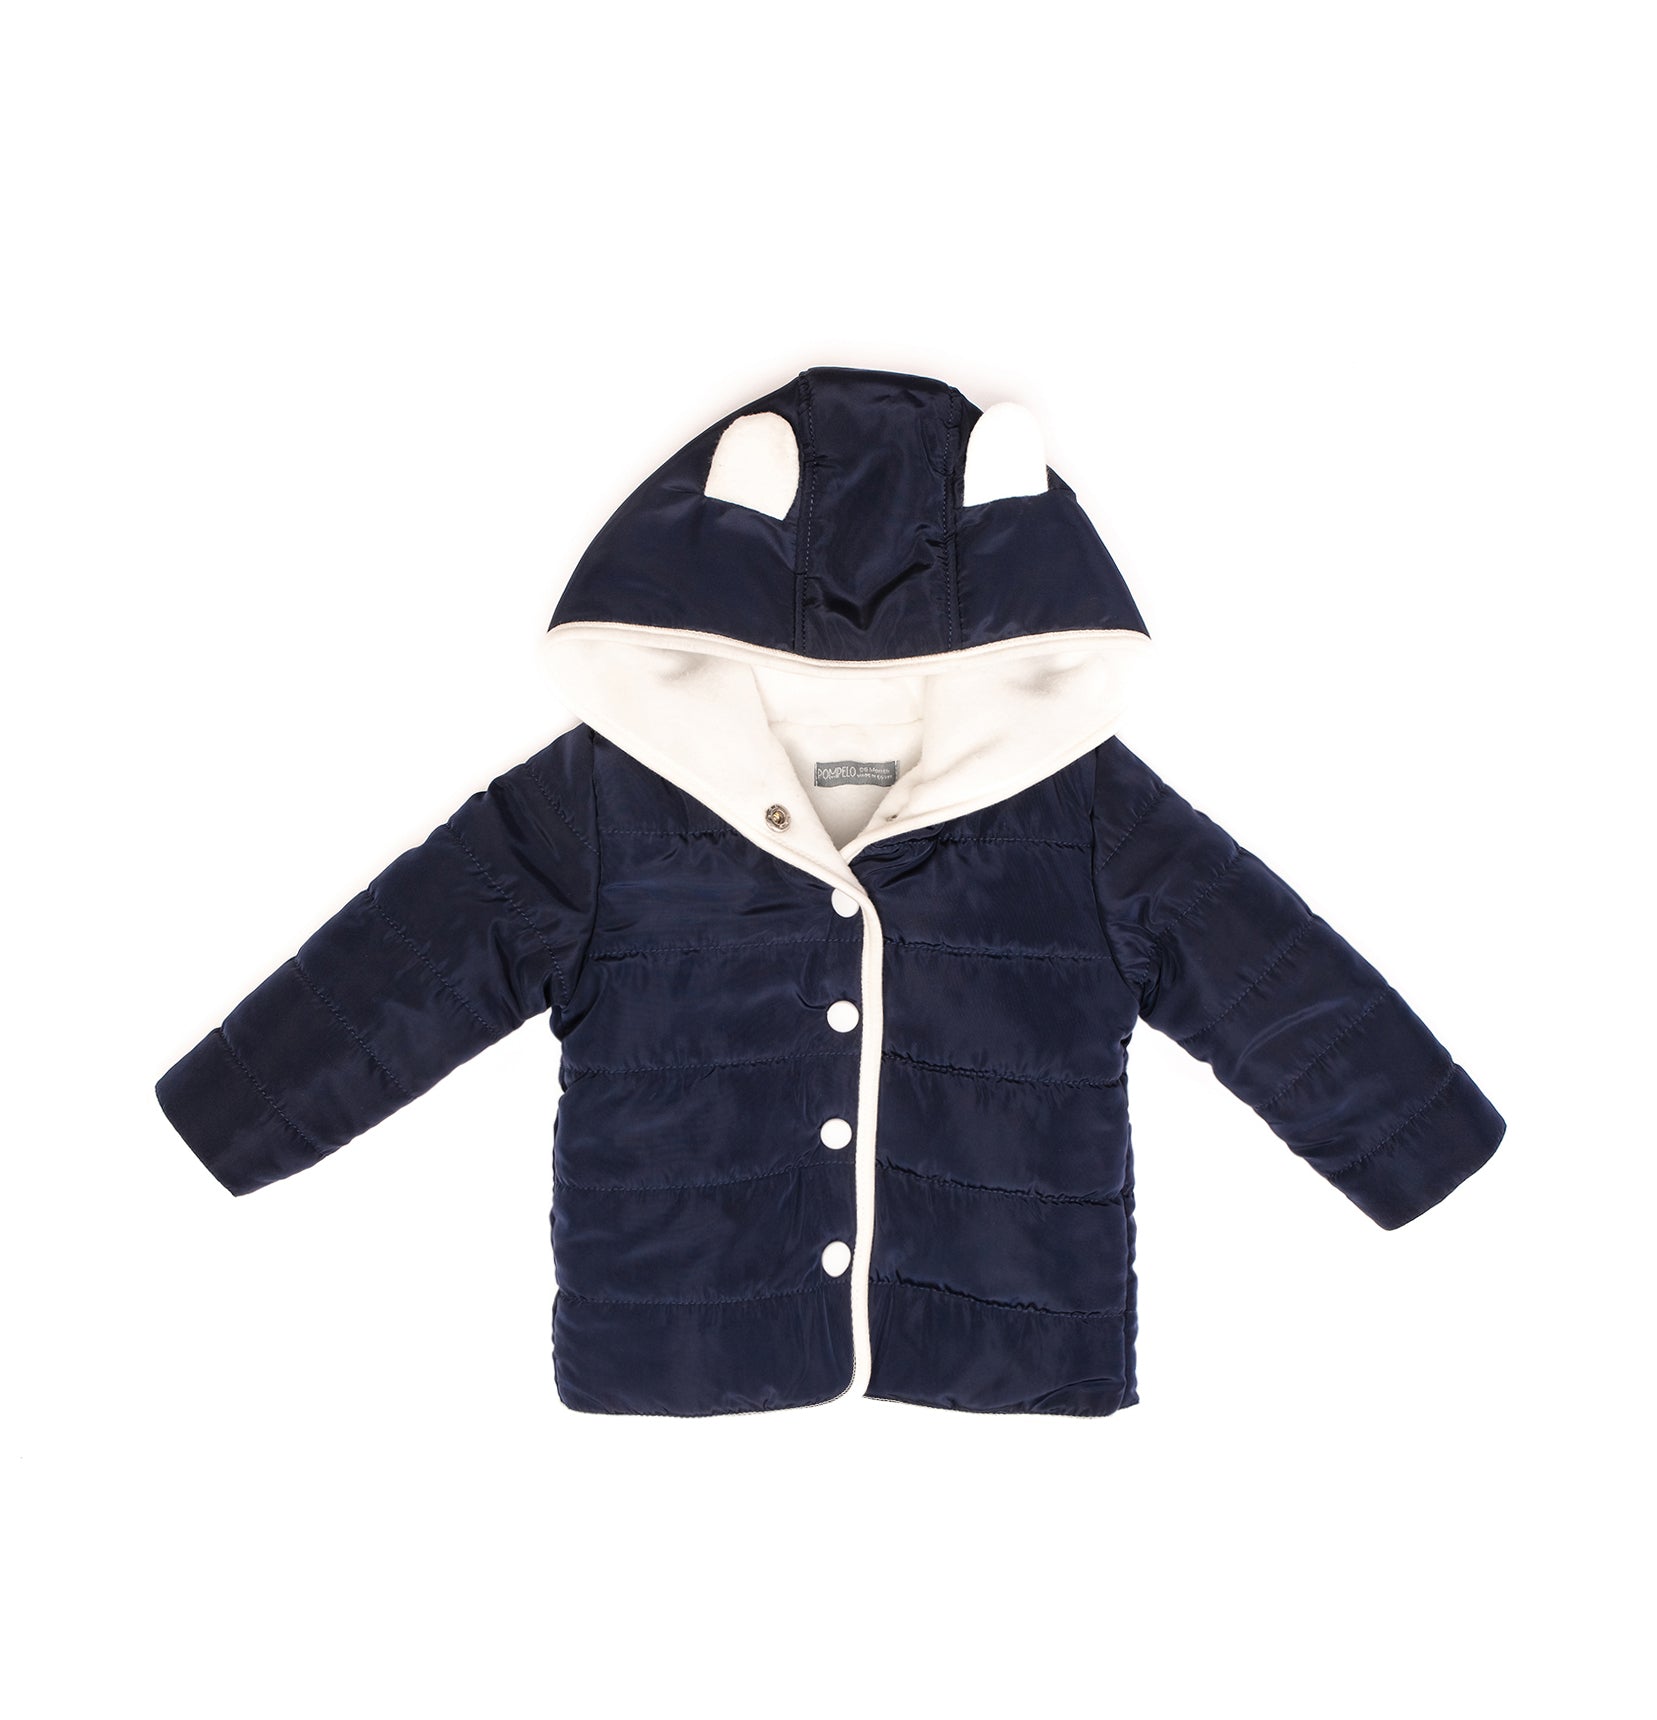 Cute navy baby girl jacket by Pompelo